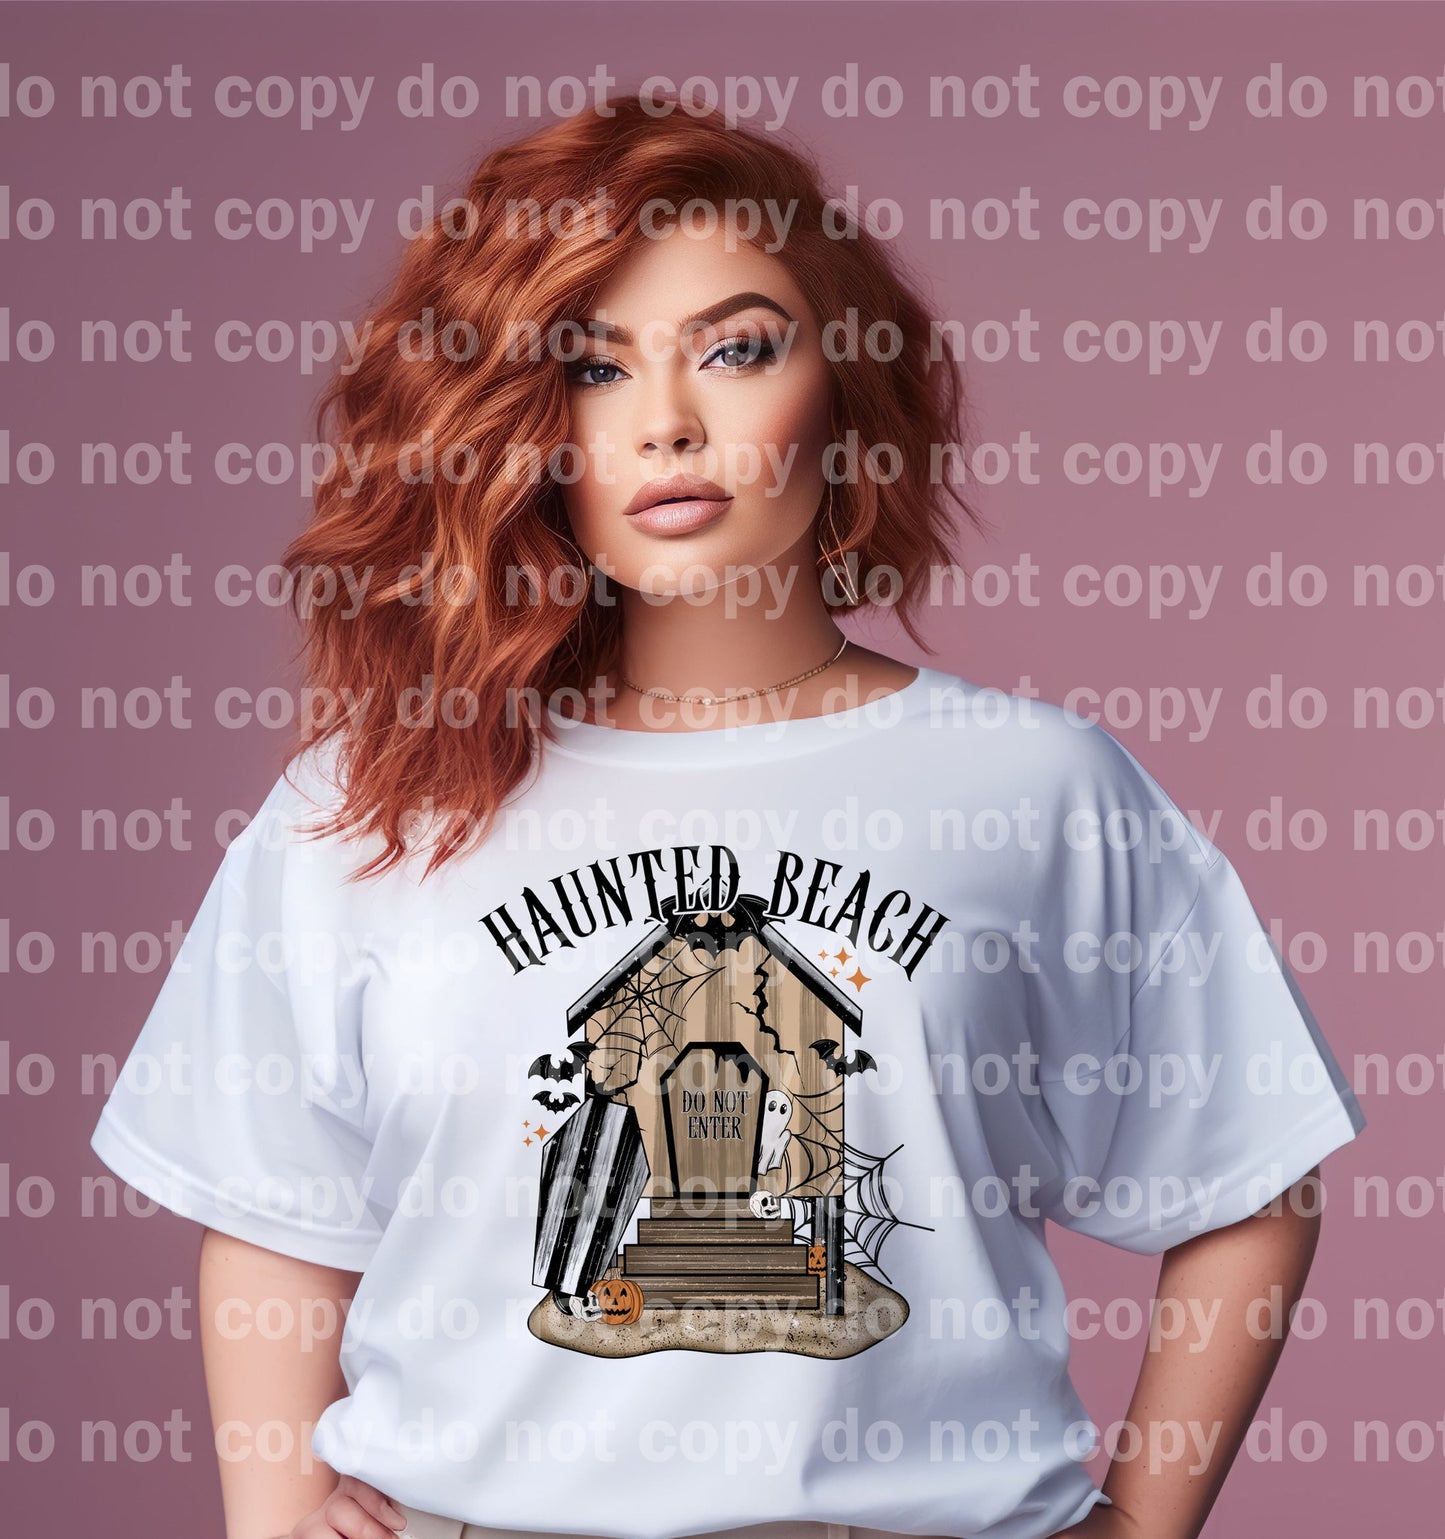 Haunted Beach Do Not Enter with Optional Sleeve Design